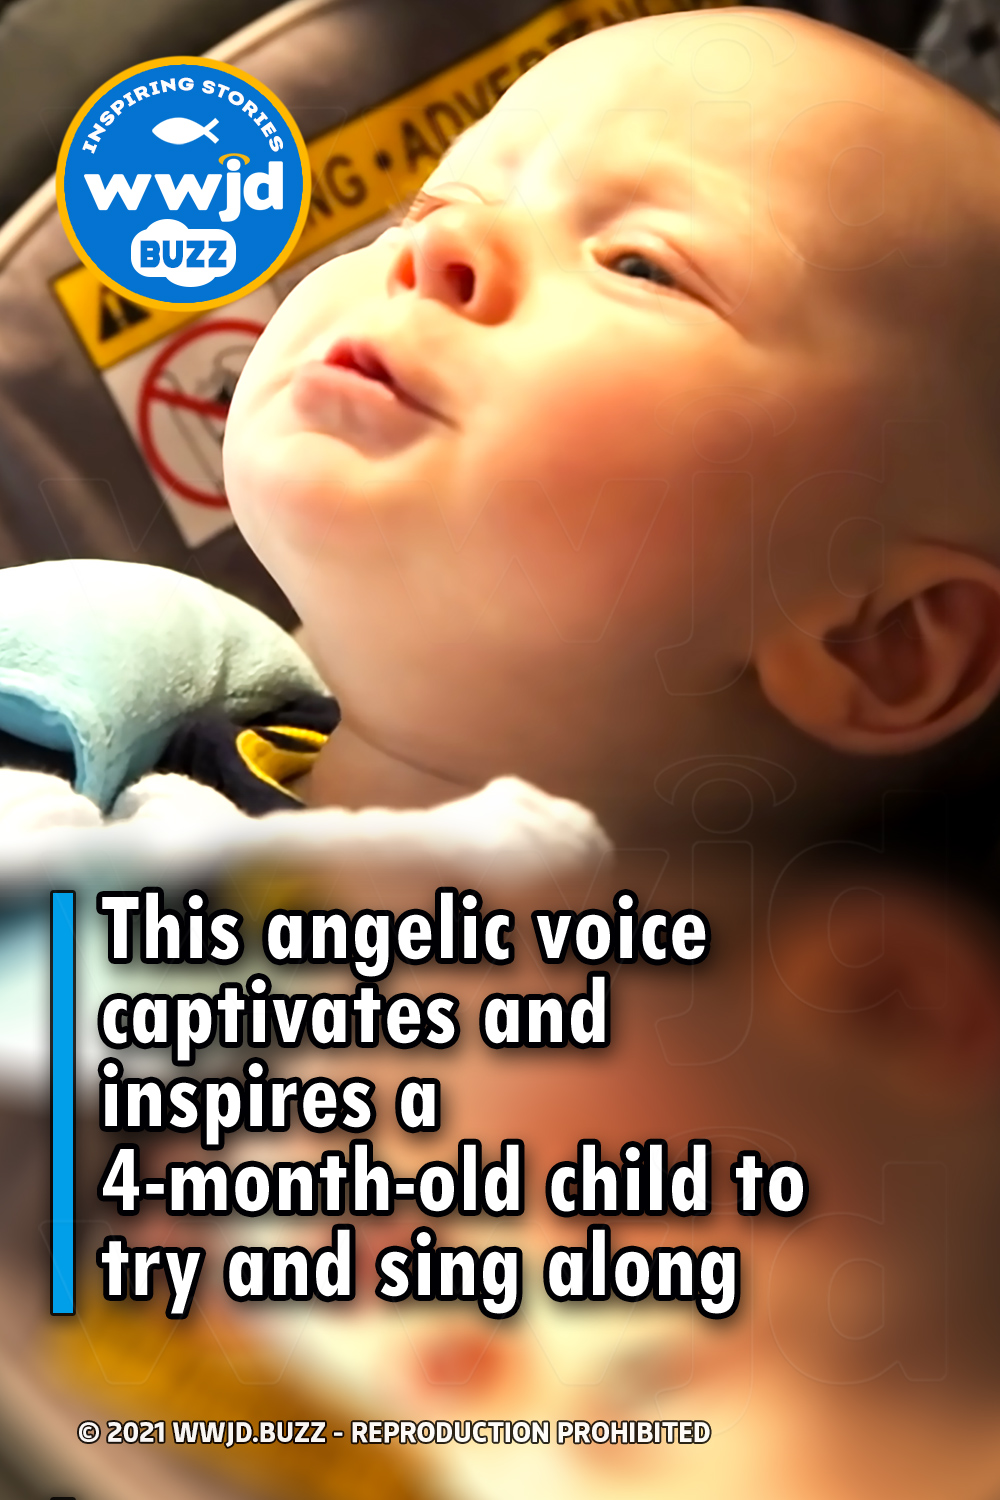 This angelic voice captivates and inspires a 4-month-old child to try and sing along